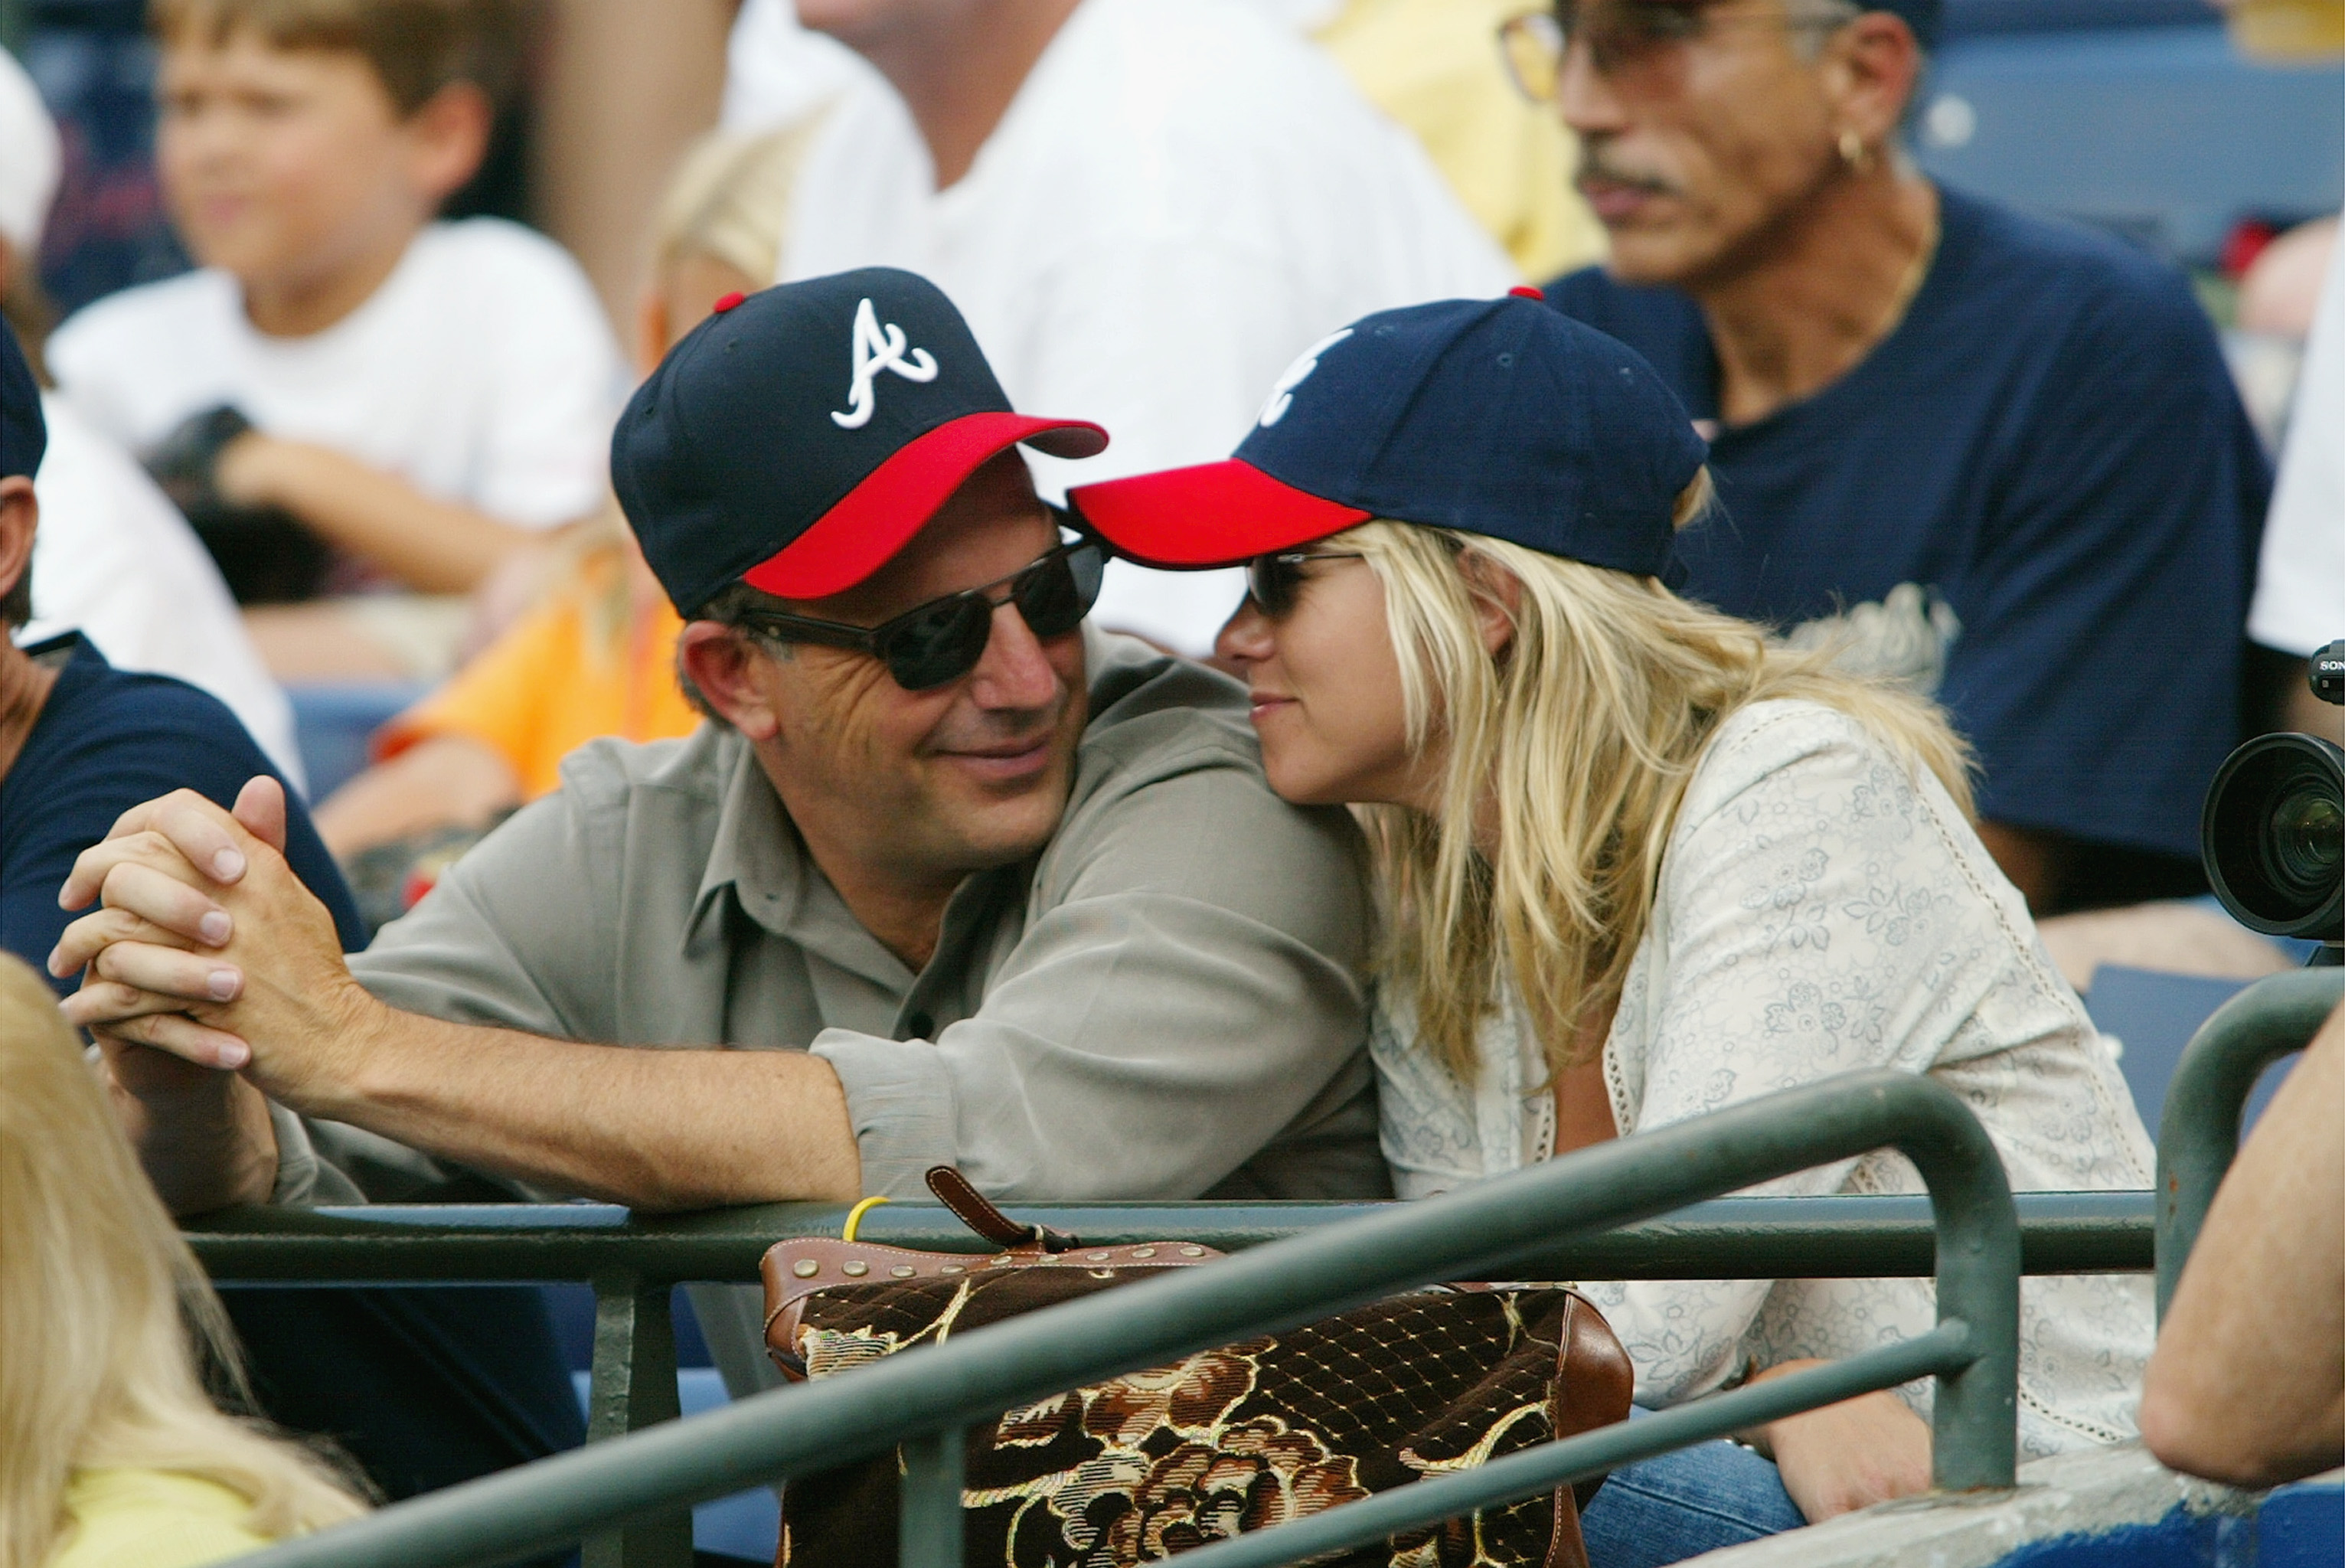 Kevin Costner and his then-fiancée Christine Baumgartner smile at each other during the game between the Florida Marlins and the Atlanta Braves on July 23, 2003 at Turner Field in Atlanta, Georgia. | Source: Getty Images